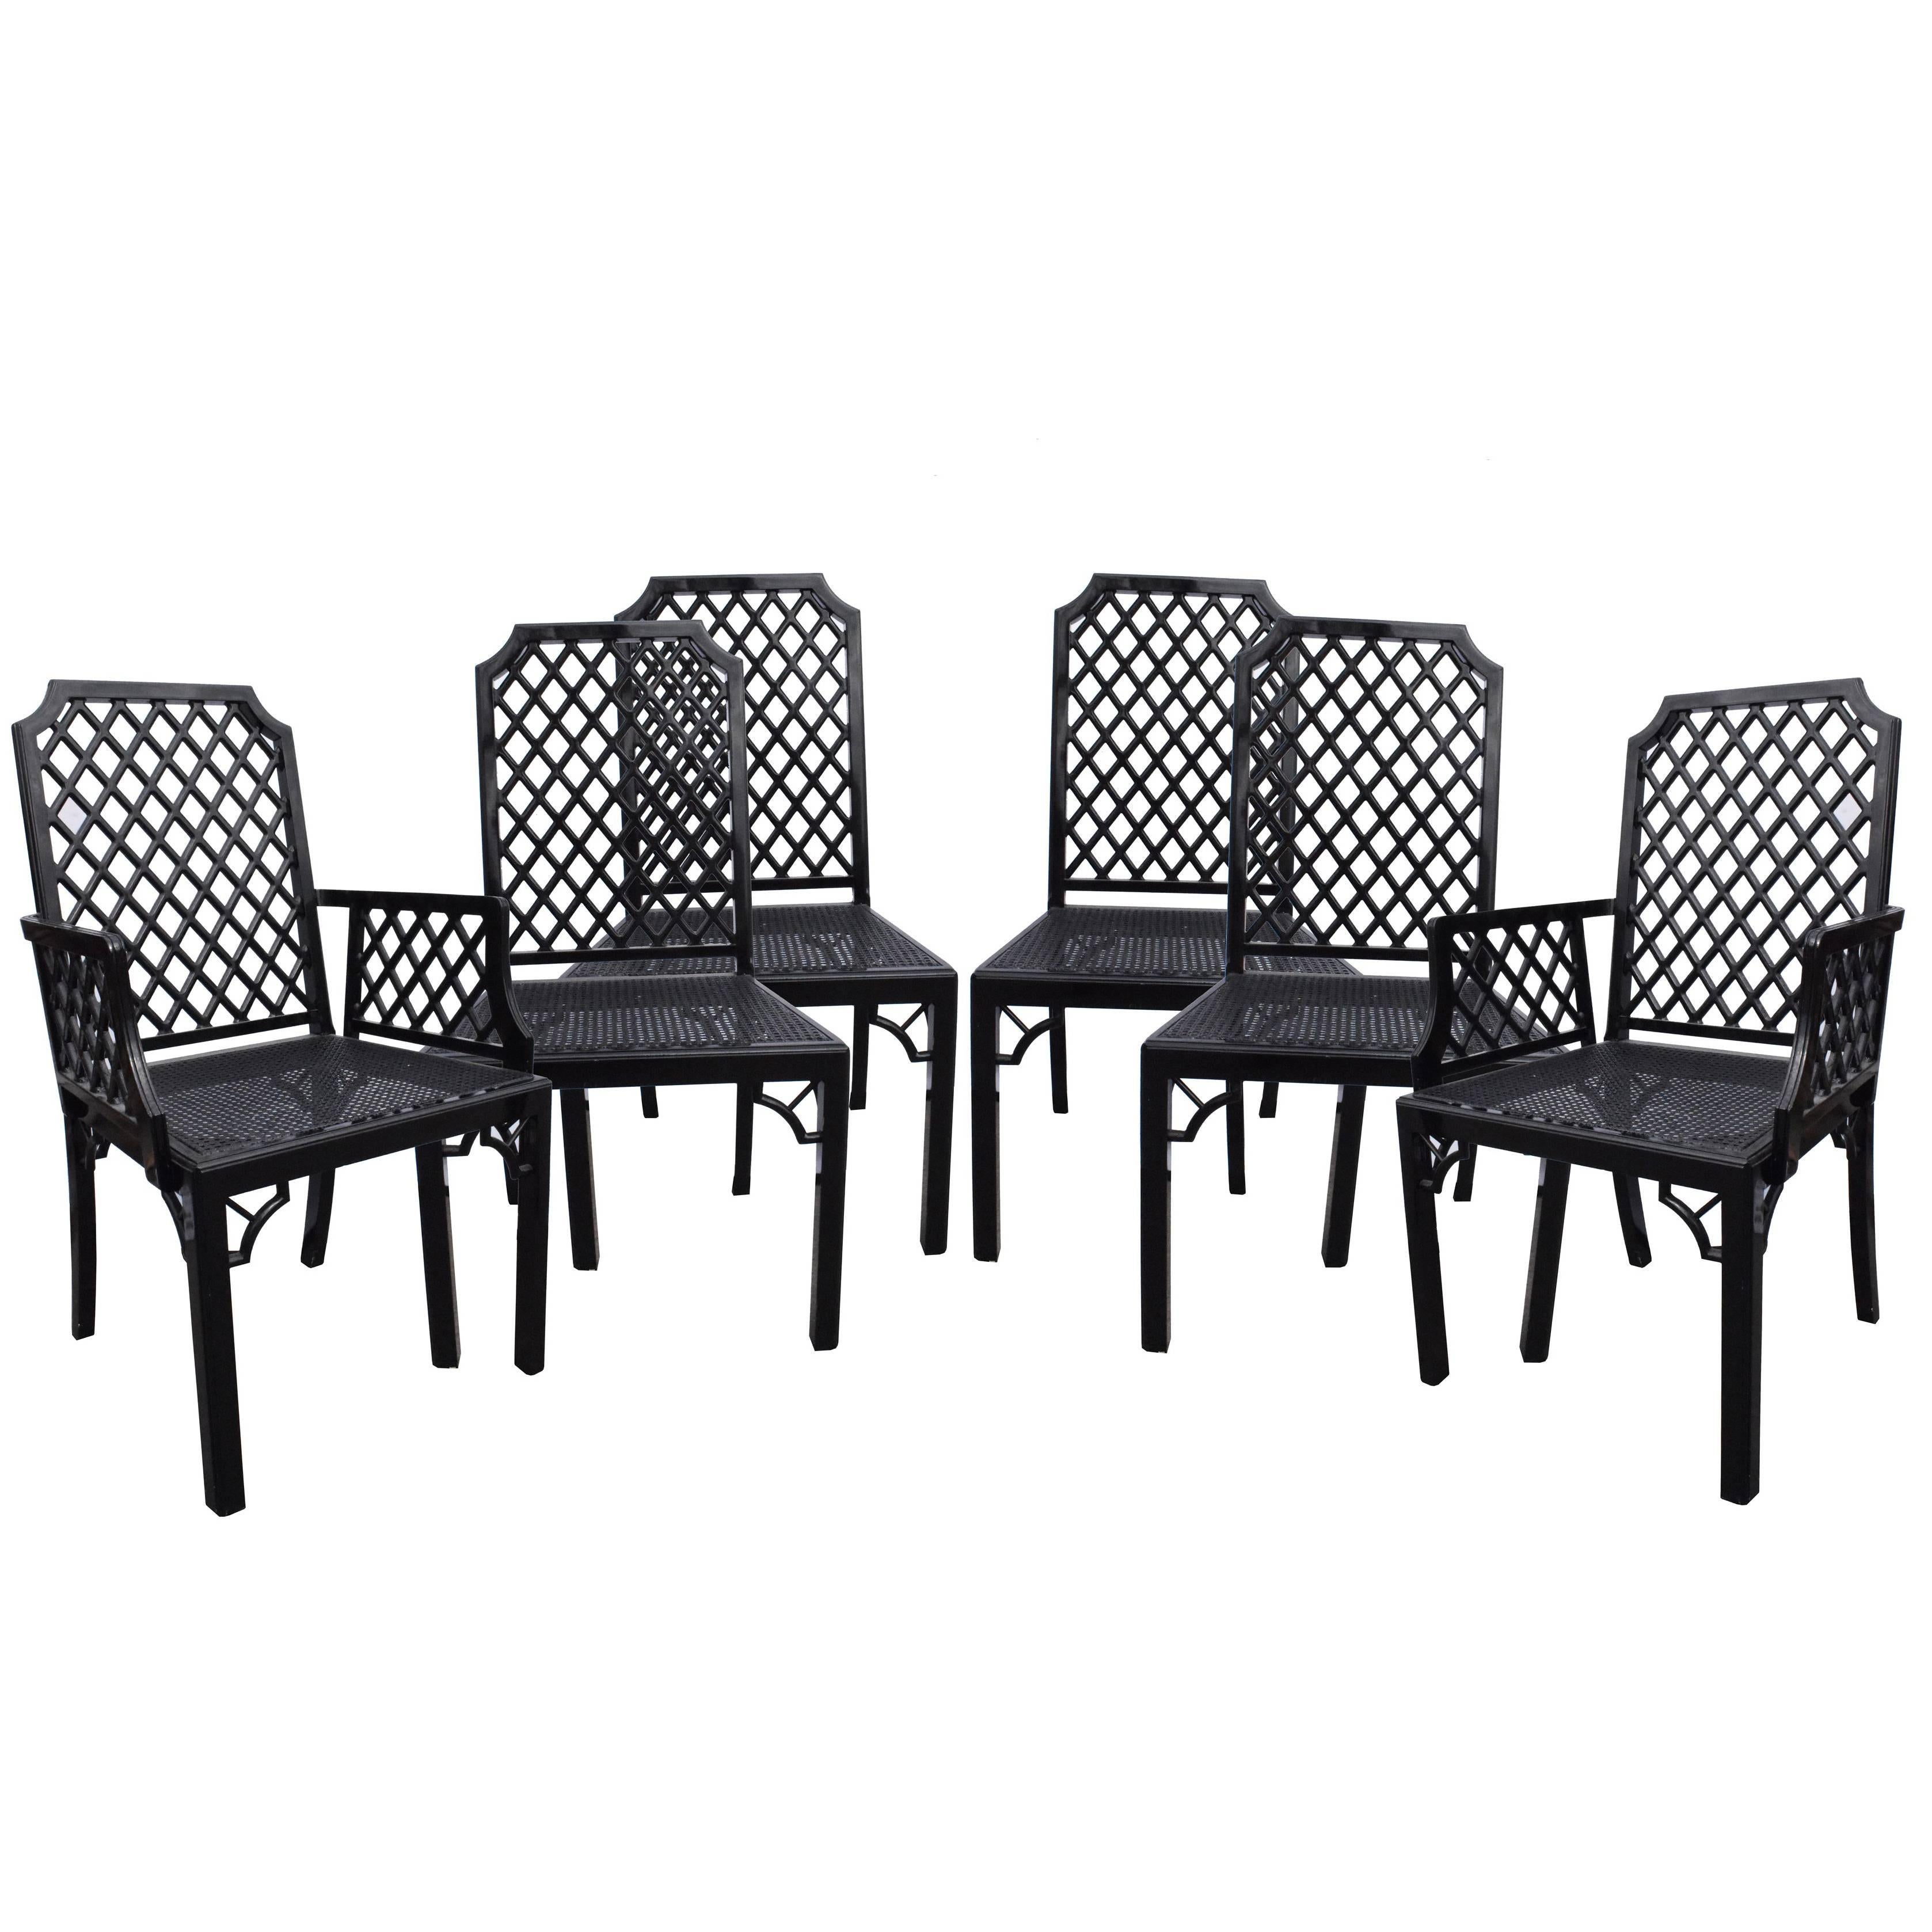 1980s Black Lacquered Wooden Set of Four Chairs and Two Armchairs